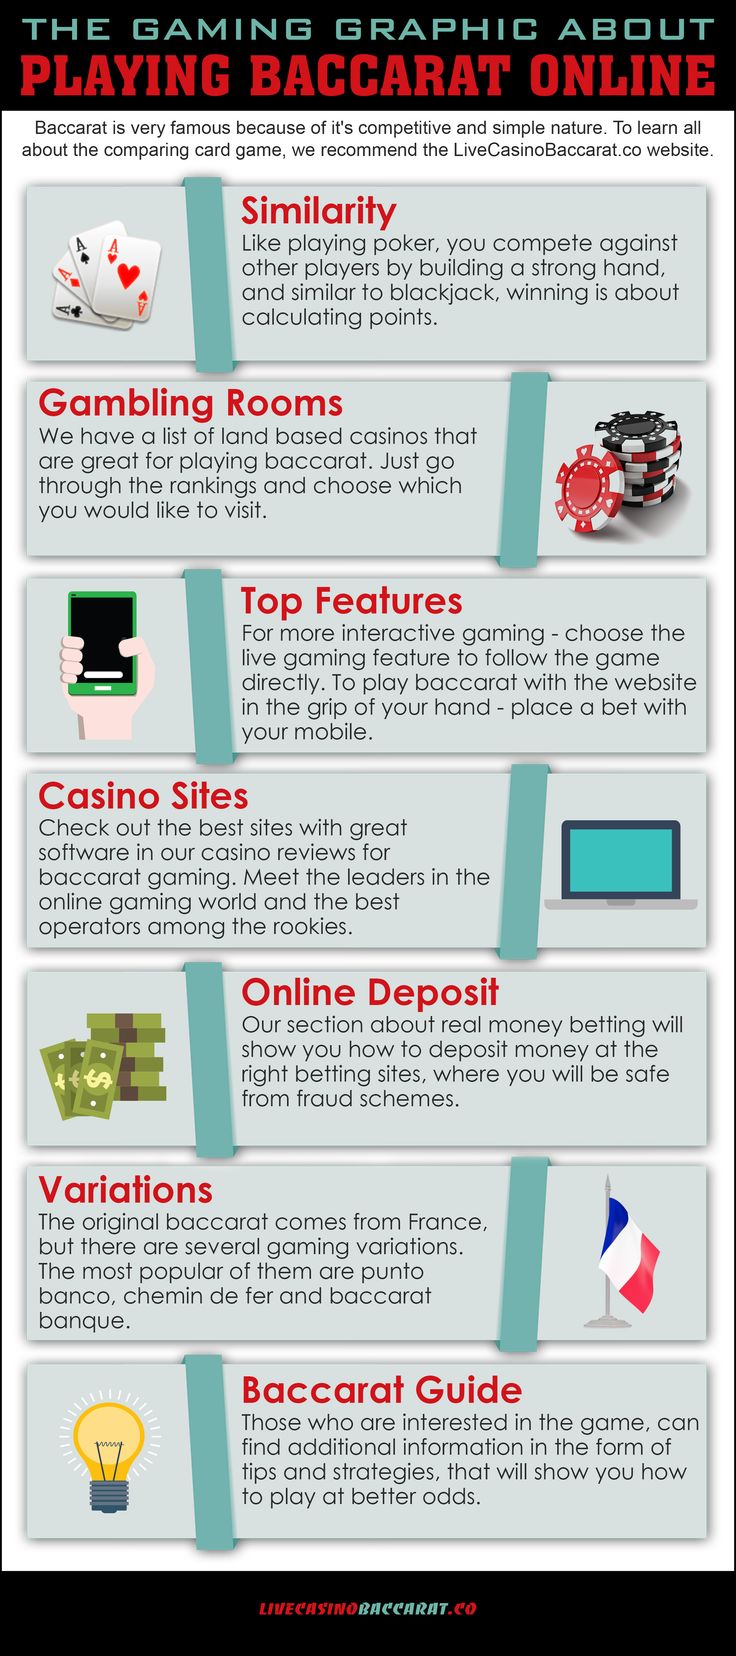 Baccarat Direct Web Site Explained Simply 216464 - Baccarat Direct Web Site Explained Simply